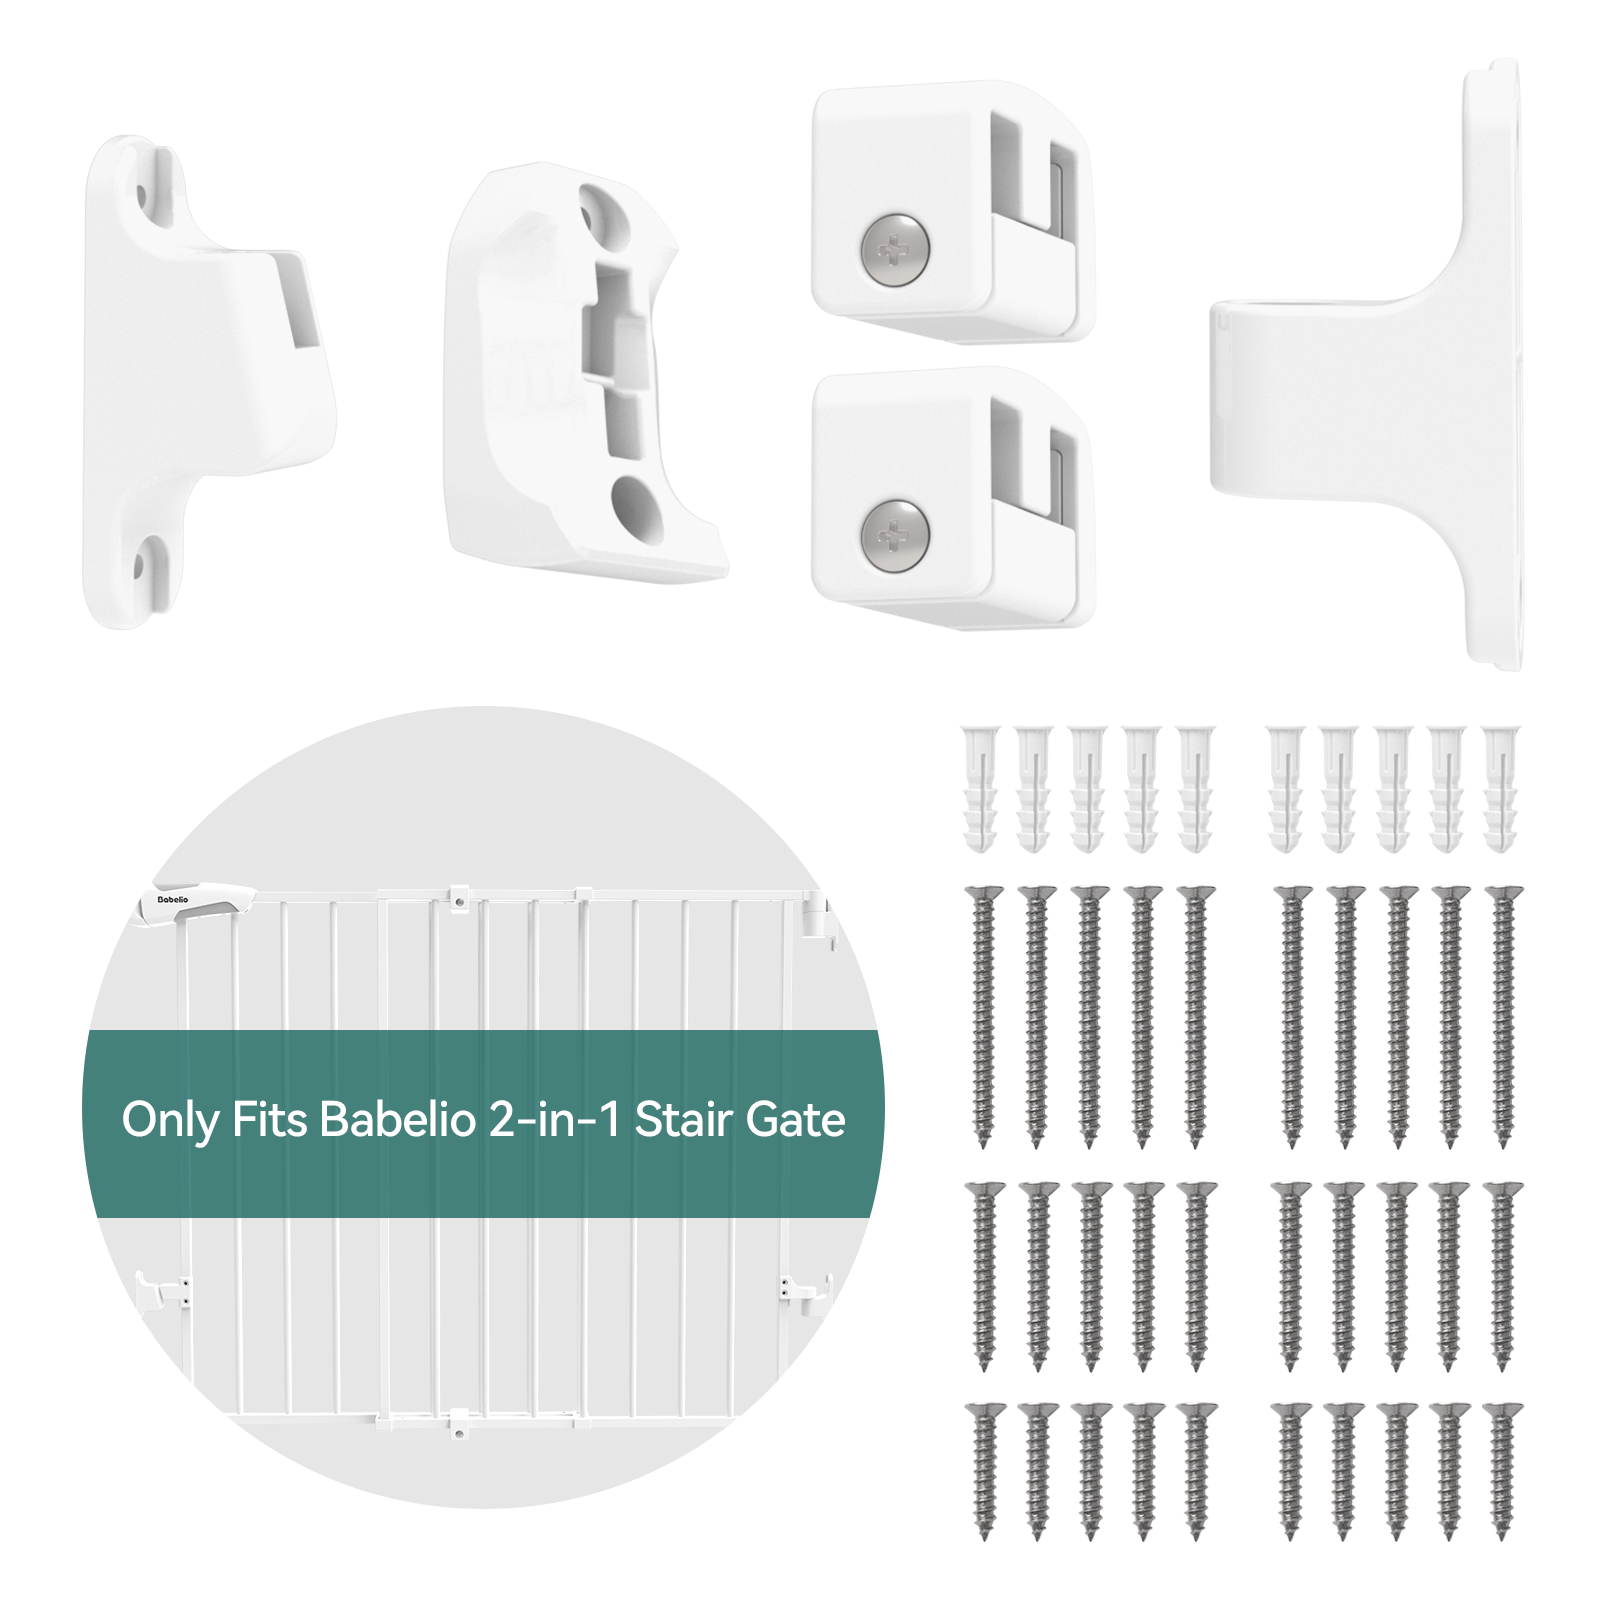 Hole Mounting Kit for Babelio 26-43" Auto Close Baby/Dog Gate for Stairs, Contains Screws